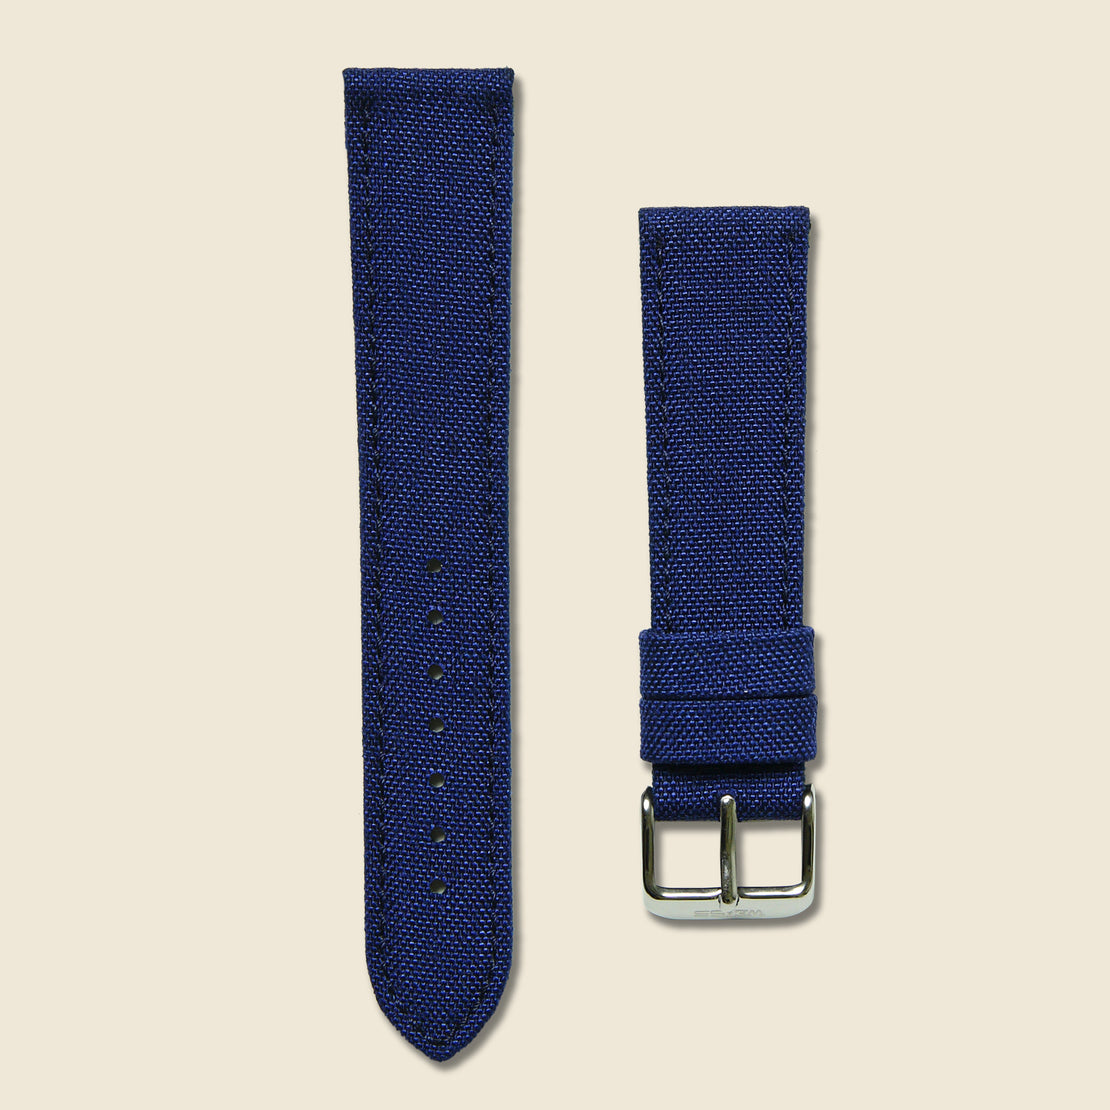 Weiss Watch Co Canvas Watch Band - Navy